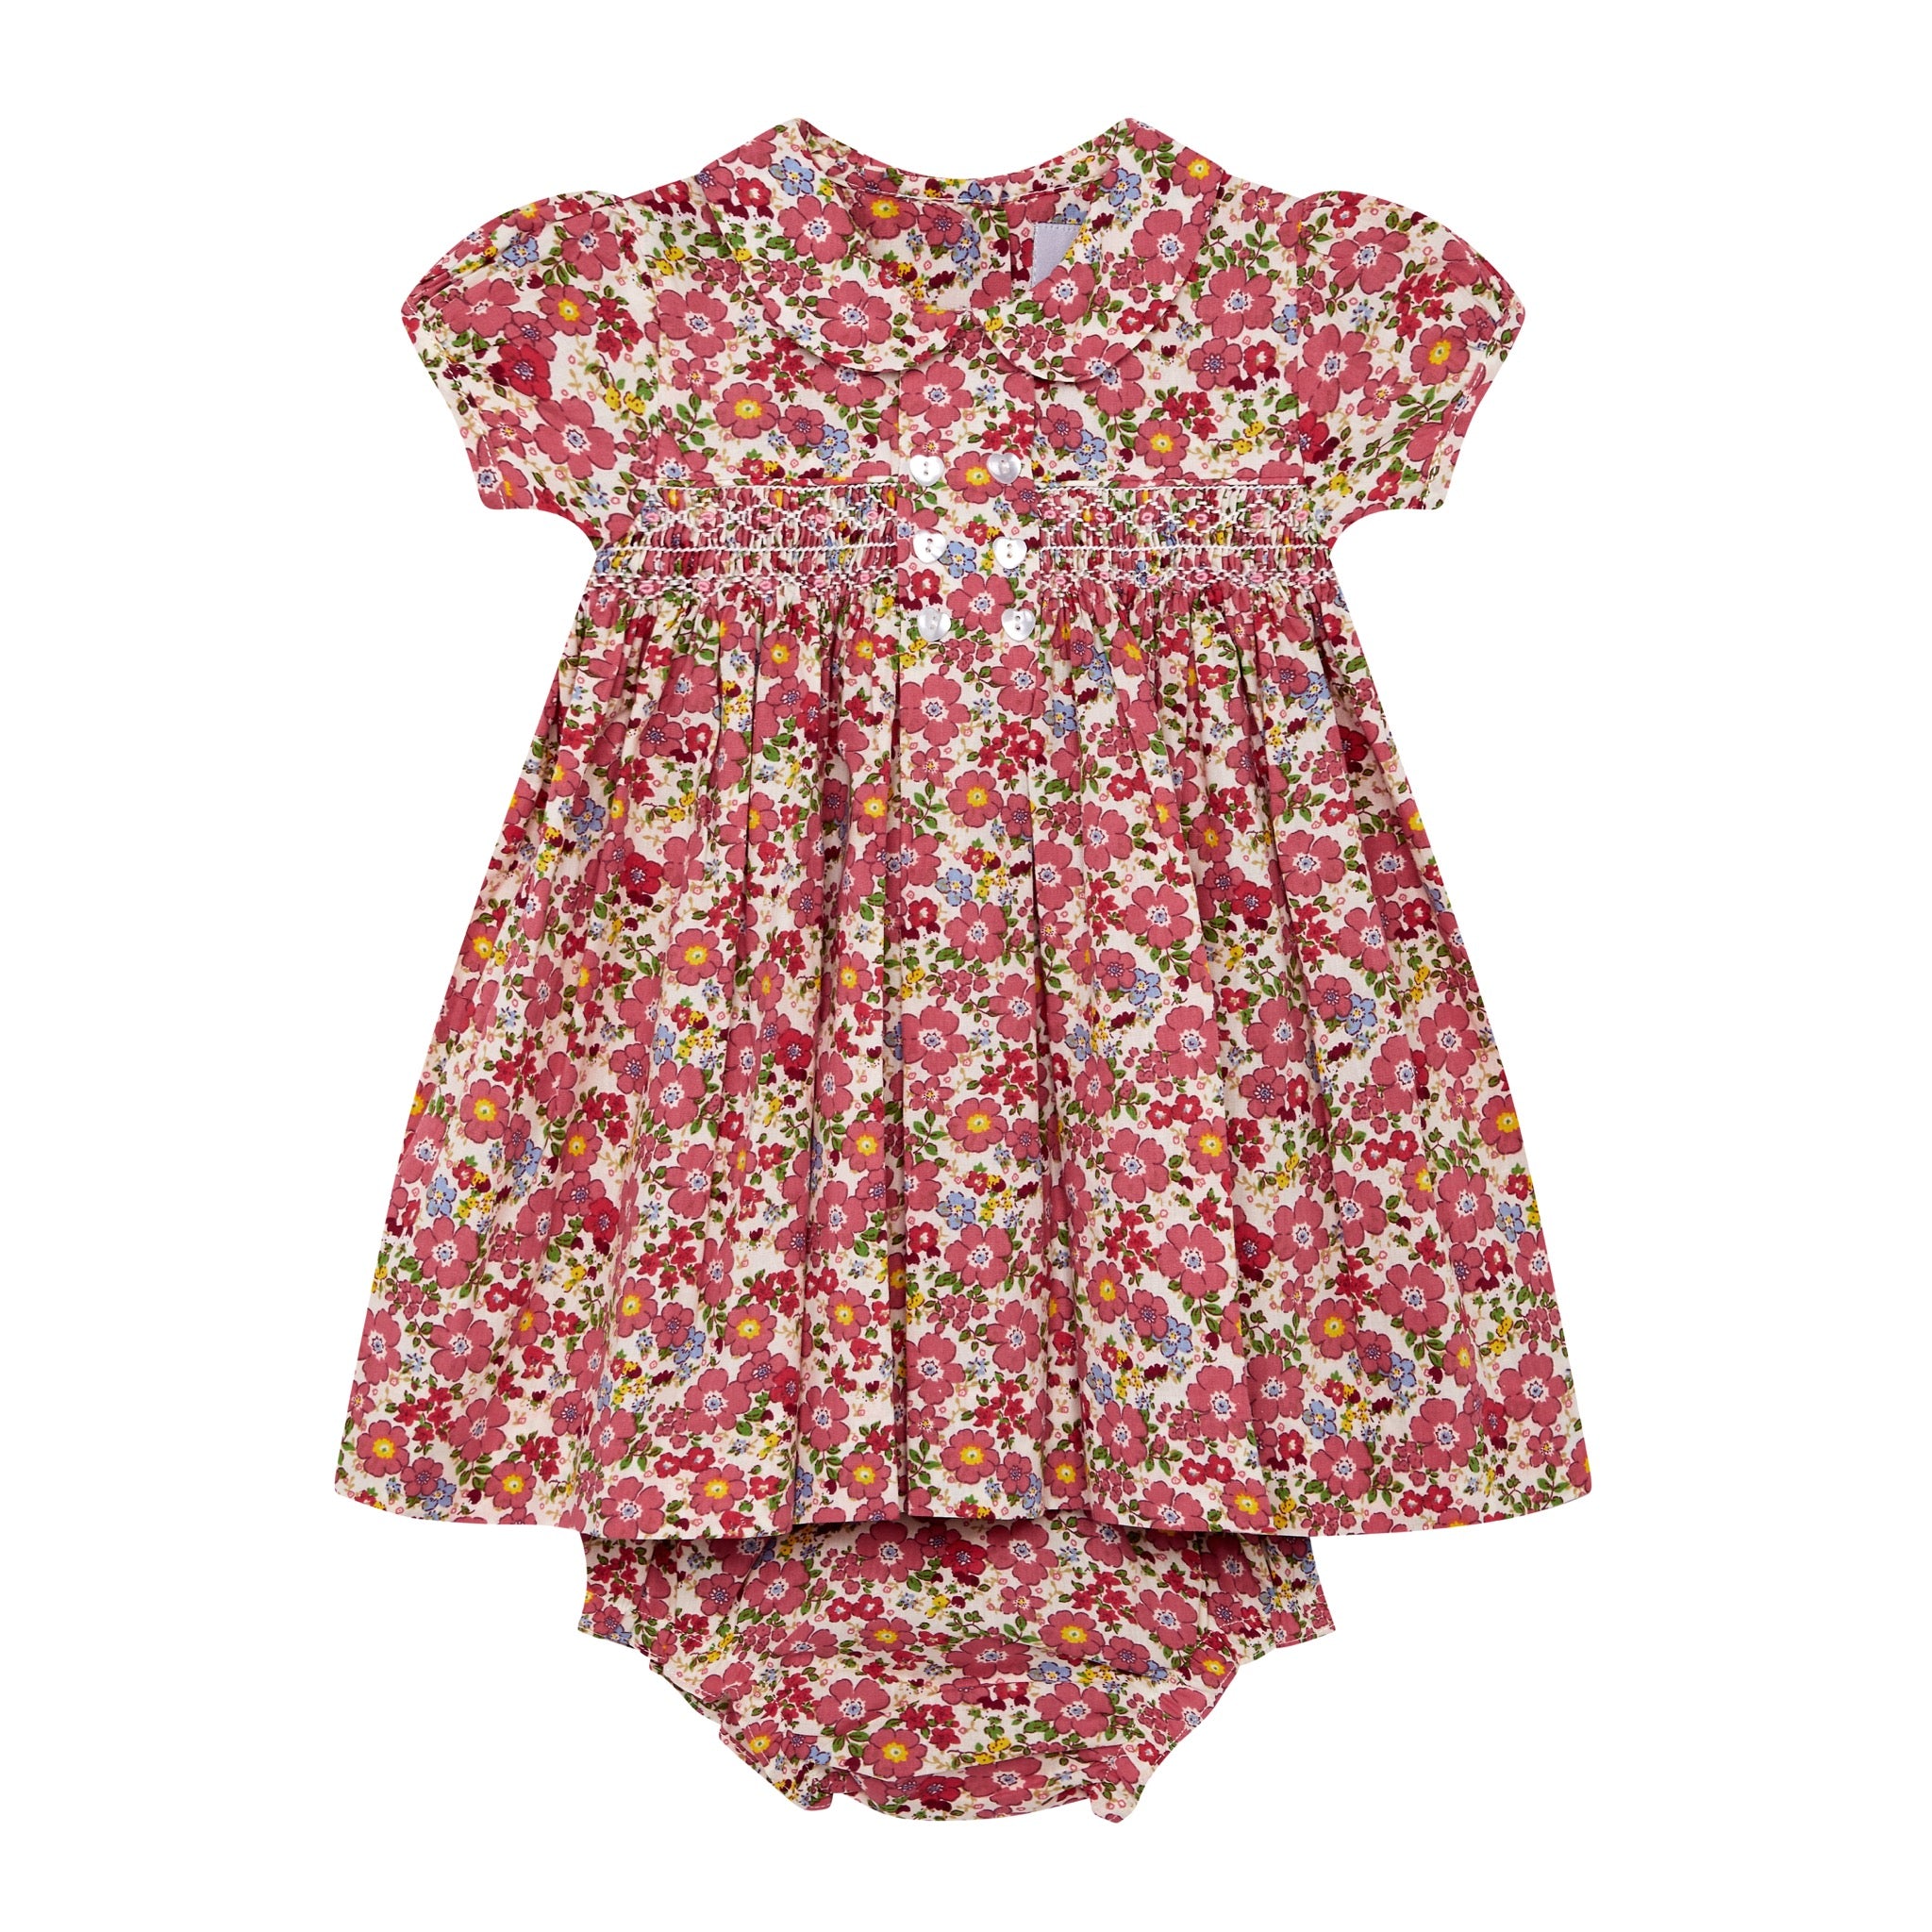 red floral smock baby dress, front